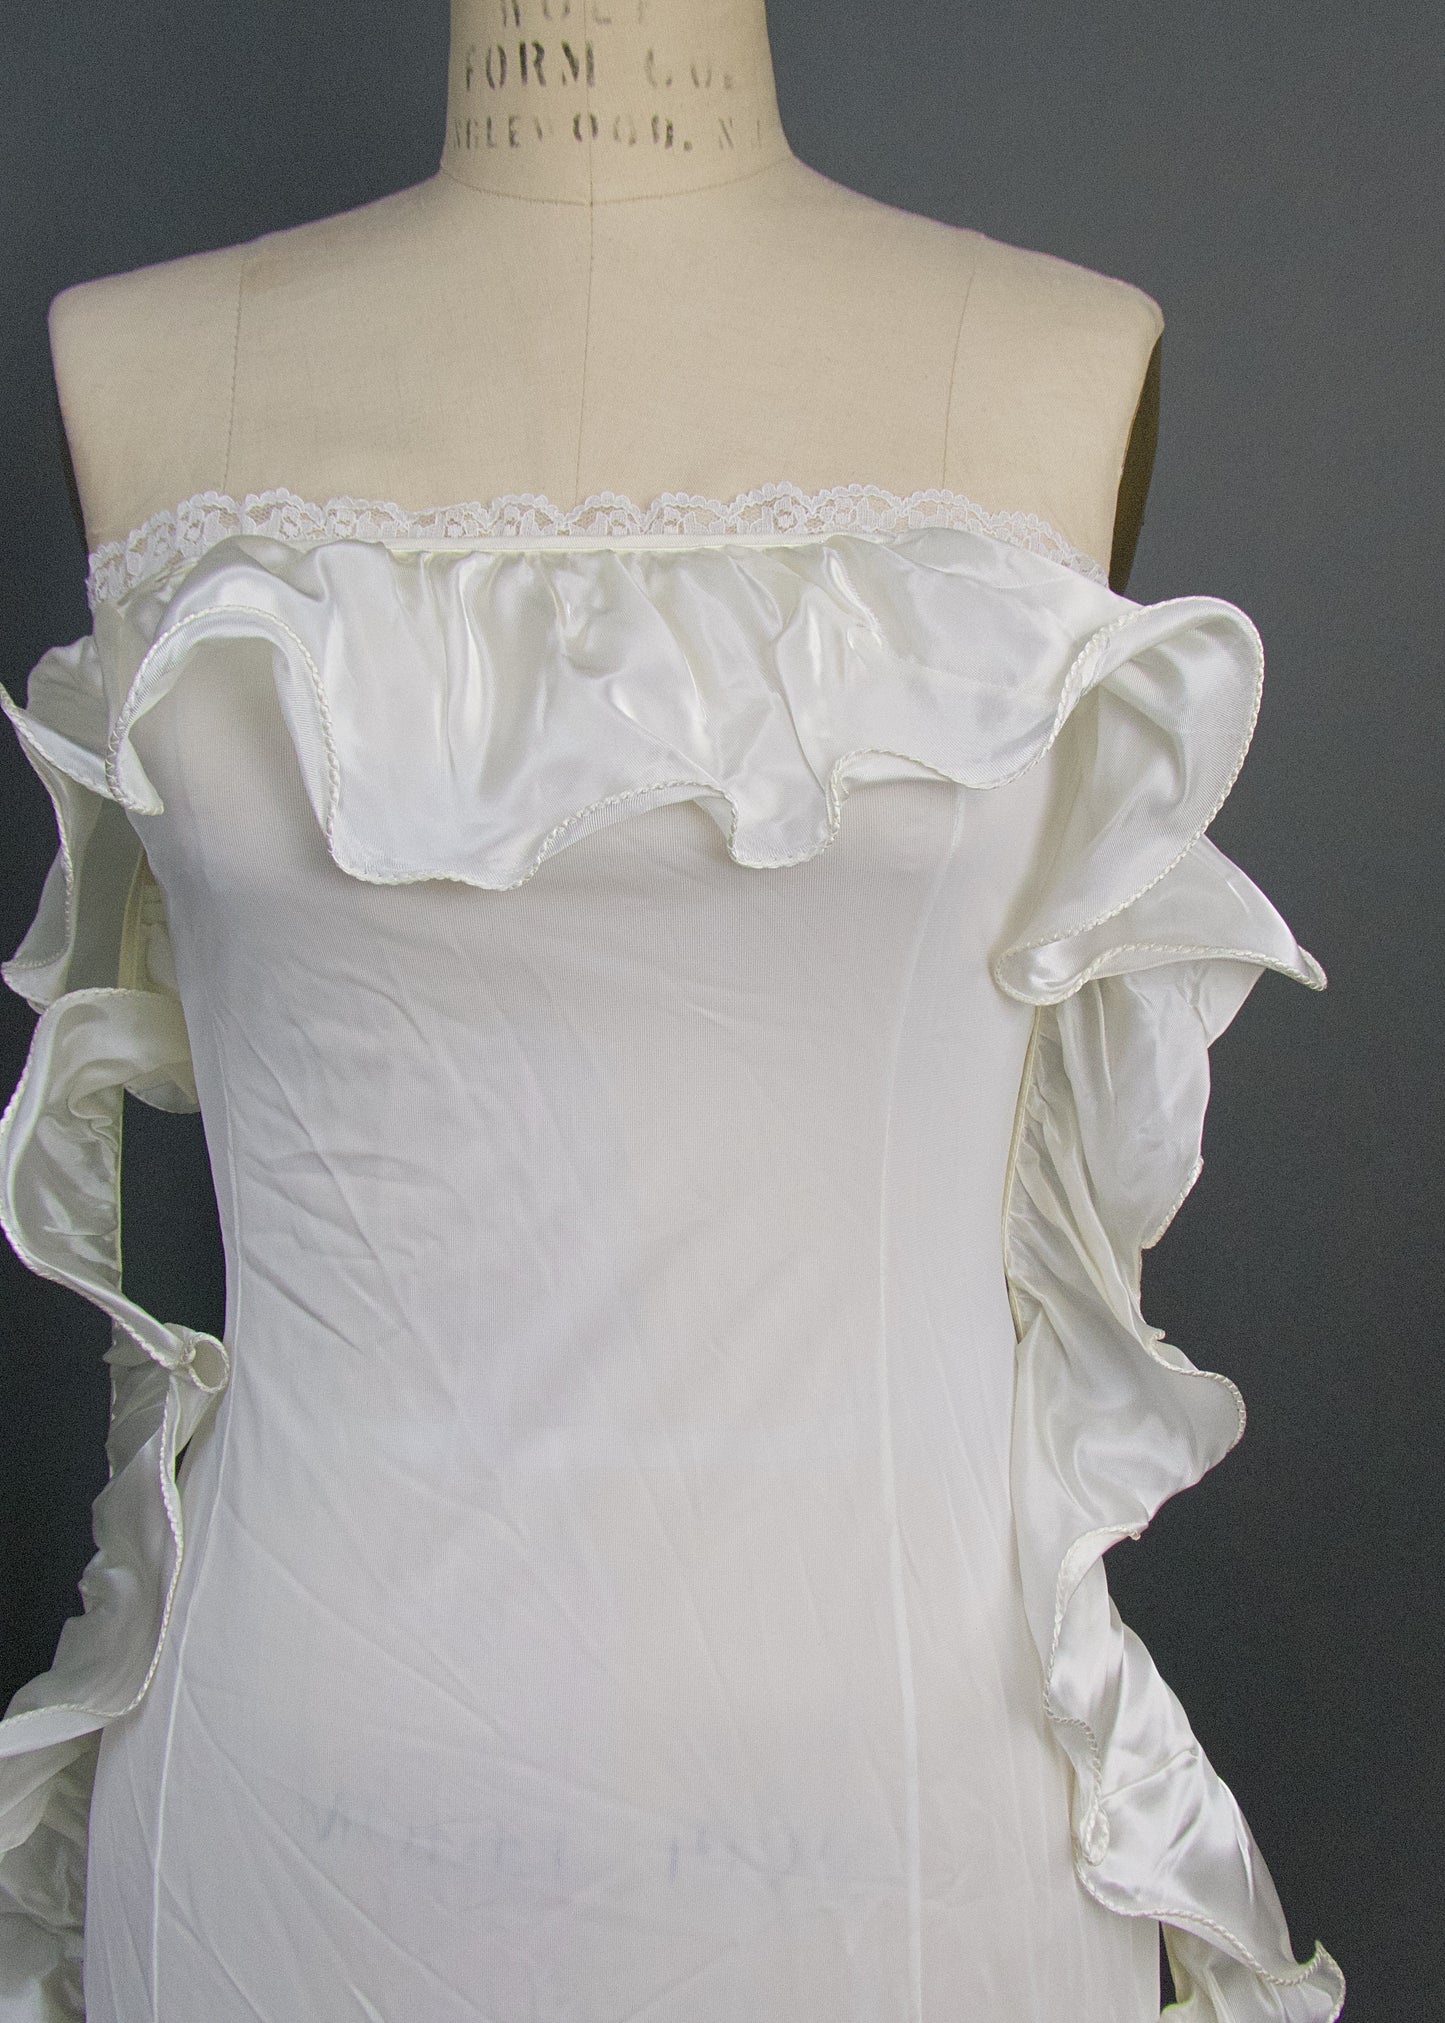 4 Inch Bridal White Ruffle Satin Trim, Sold by the yard